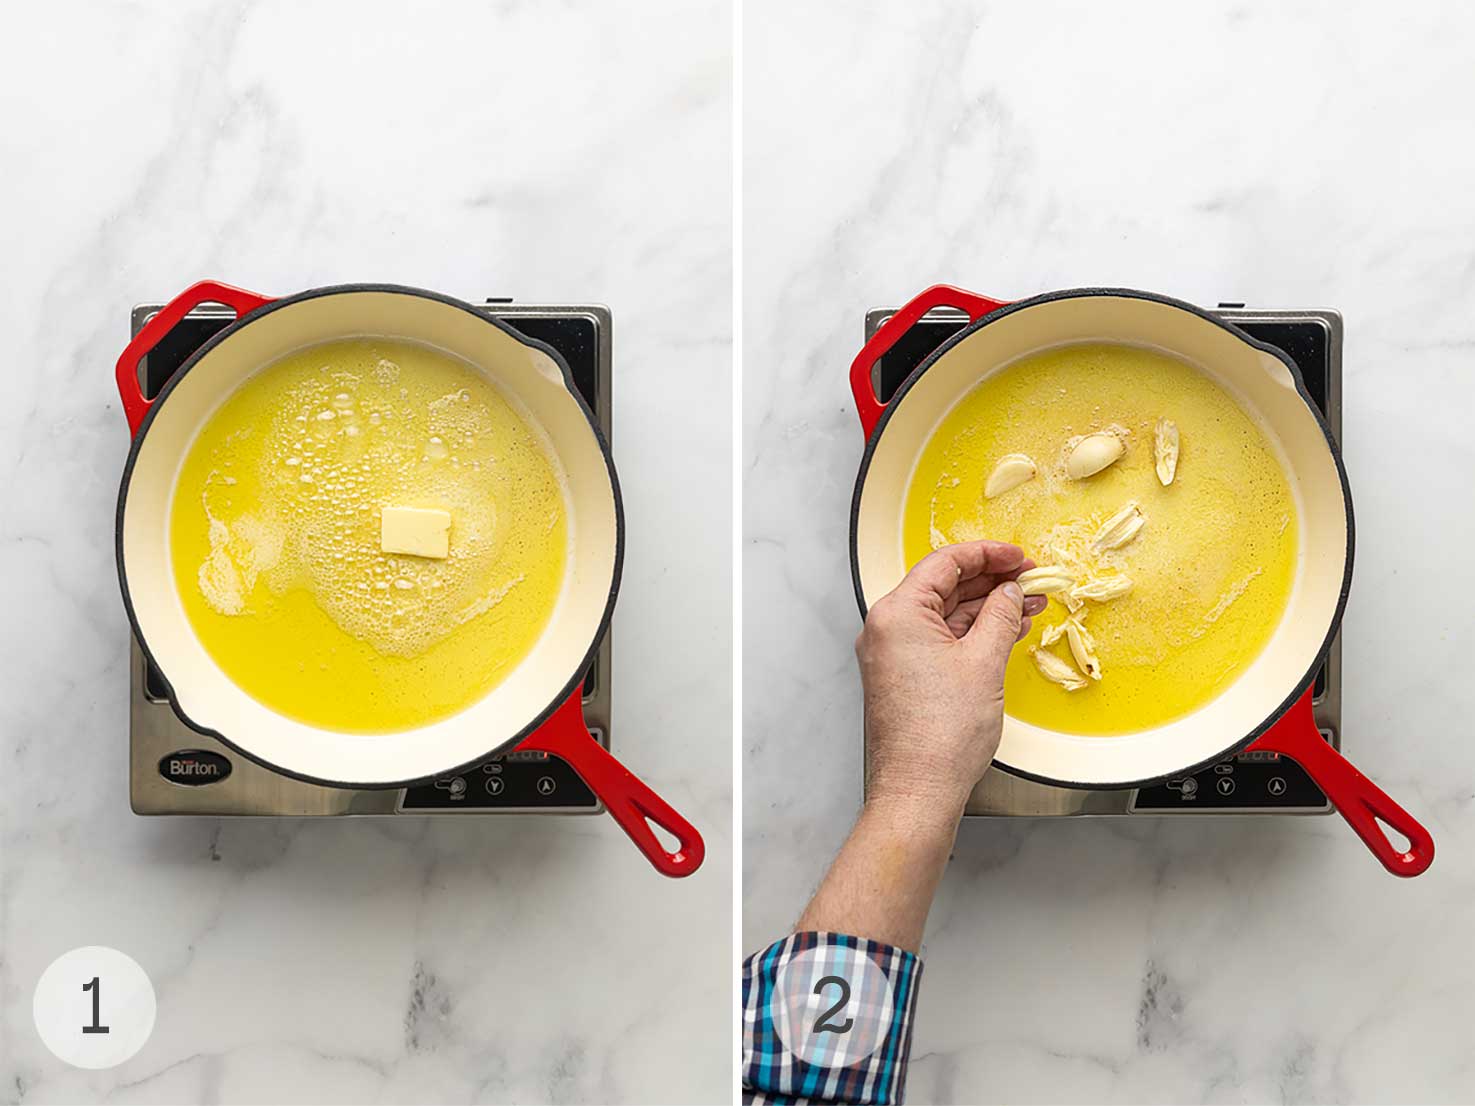 Butter melting in a skillet with oil; a person adding garlic to a skillet of melted butter and oil.